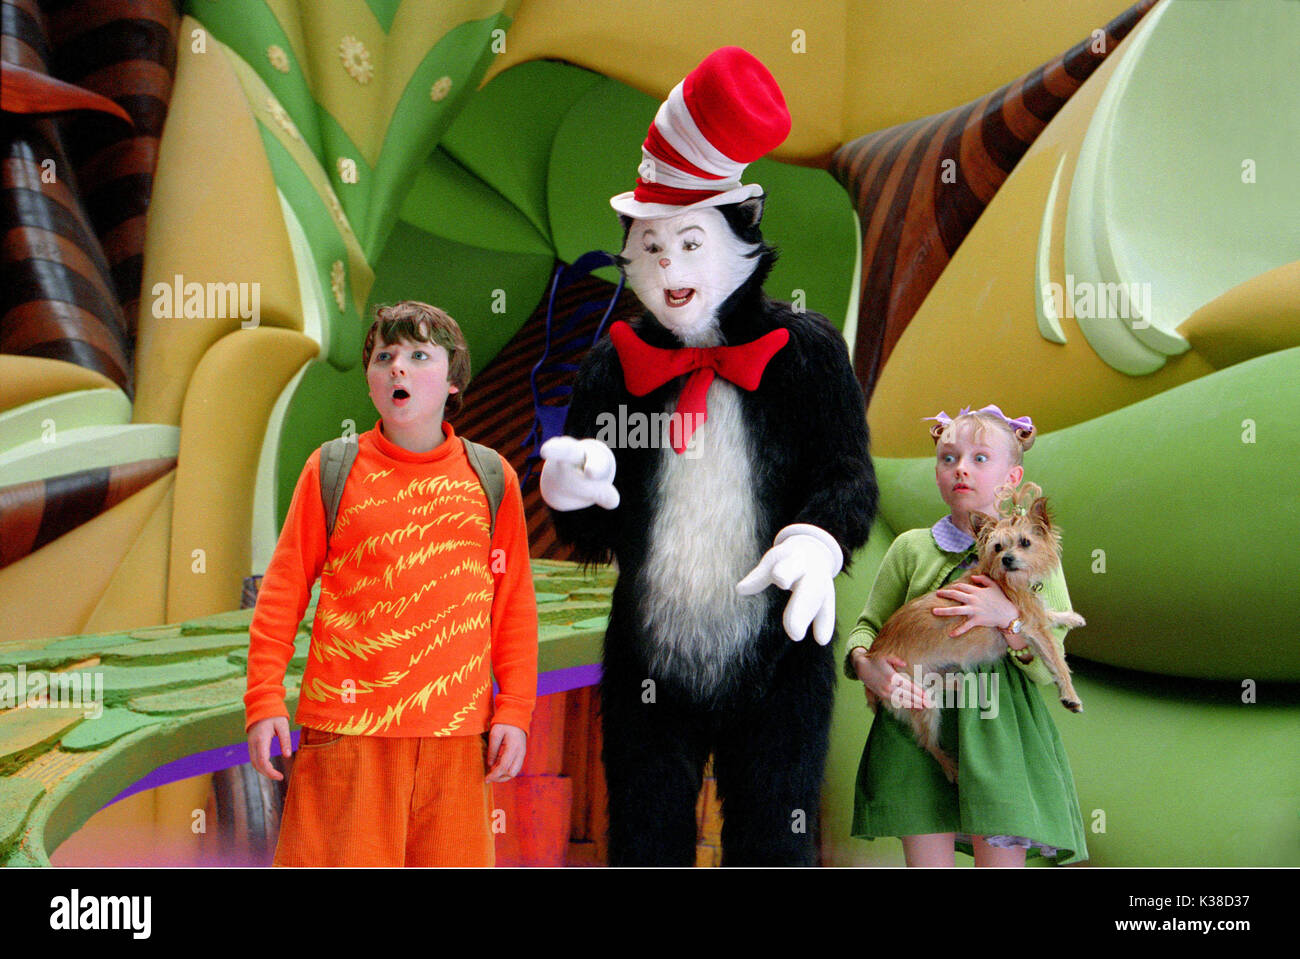 THE CAT IN THE HAT MIKE MYERS as the Cat with SPENCER BRESLIN and DAKOTA FANNING (Sally)     Date: 2003 Stock Photo